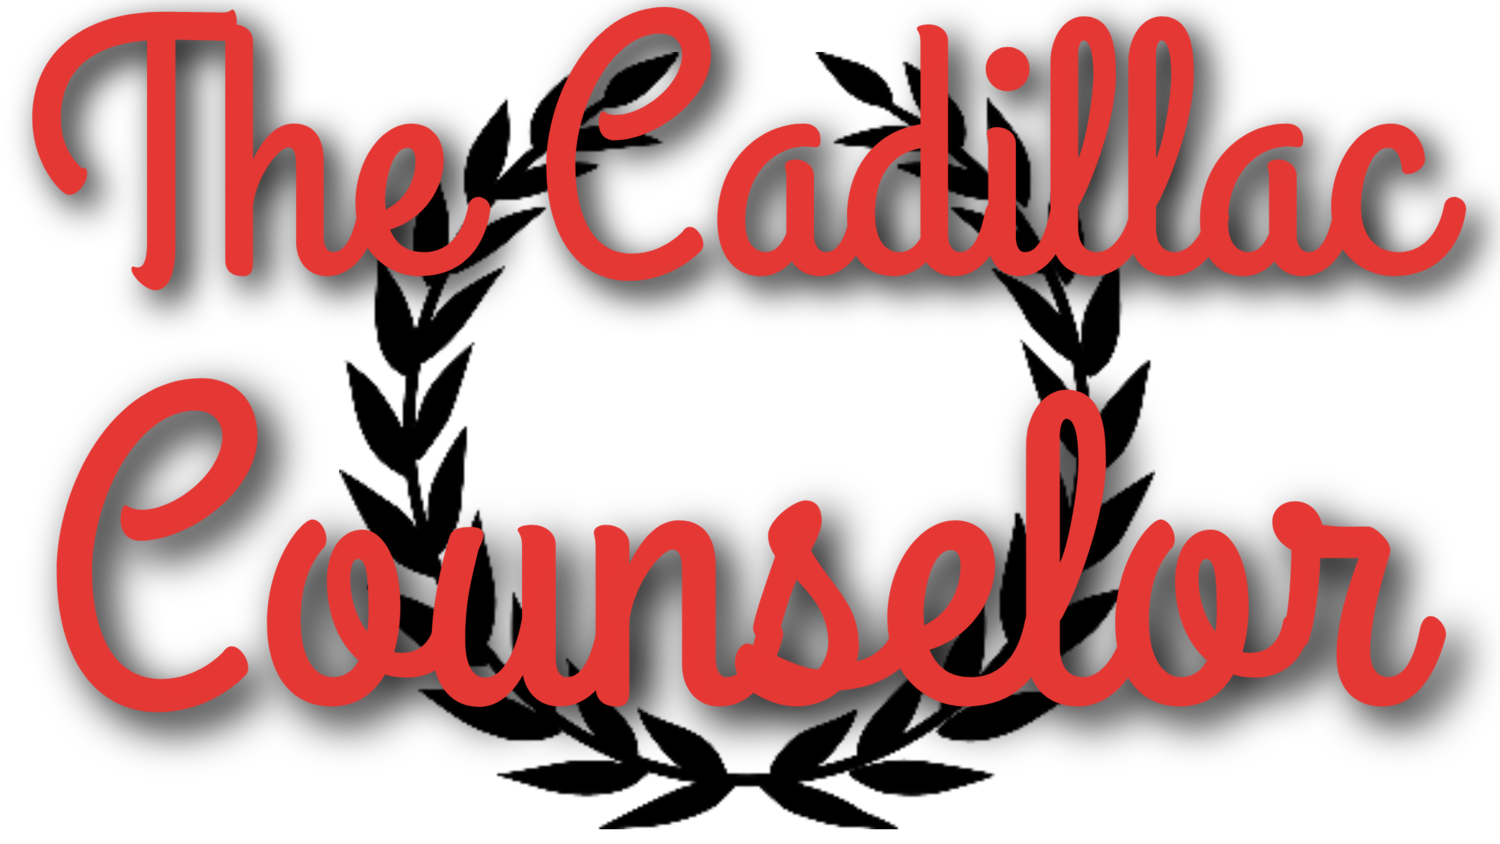 The &quot;Cadillac&quot; Counselor